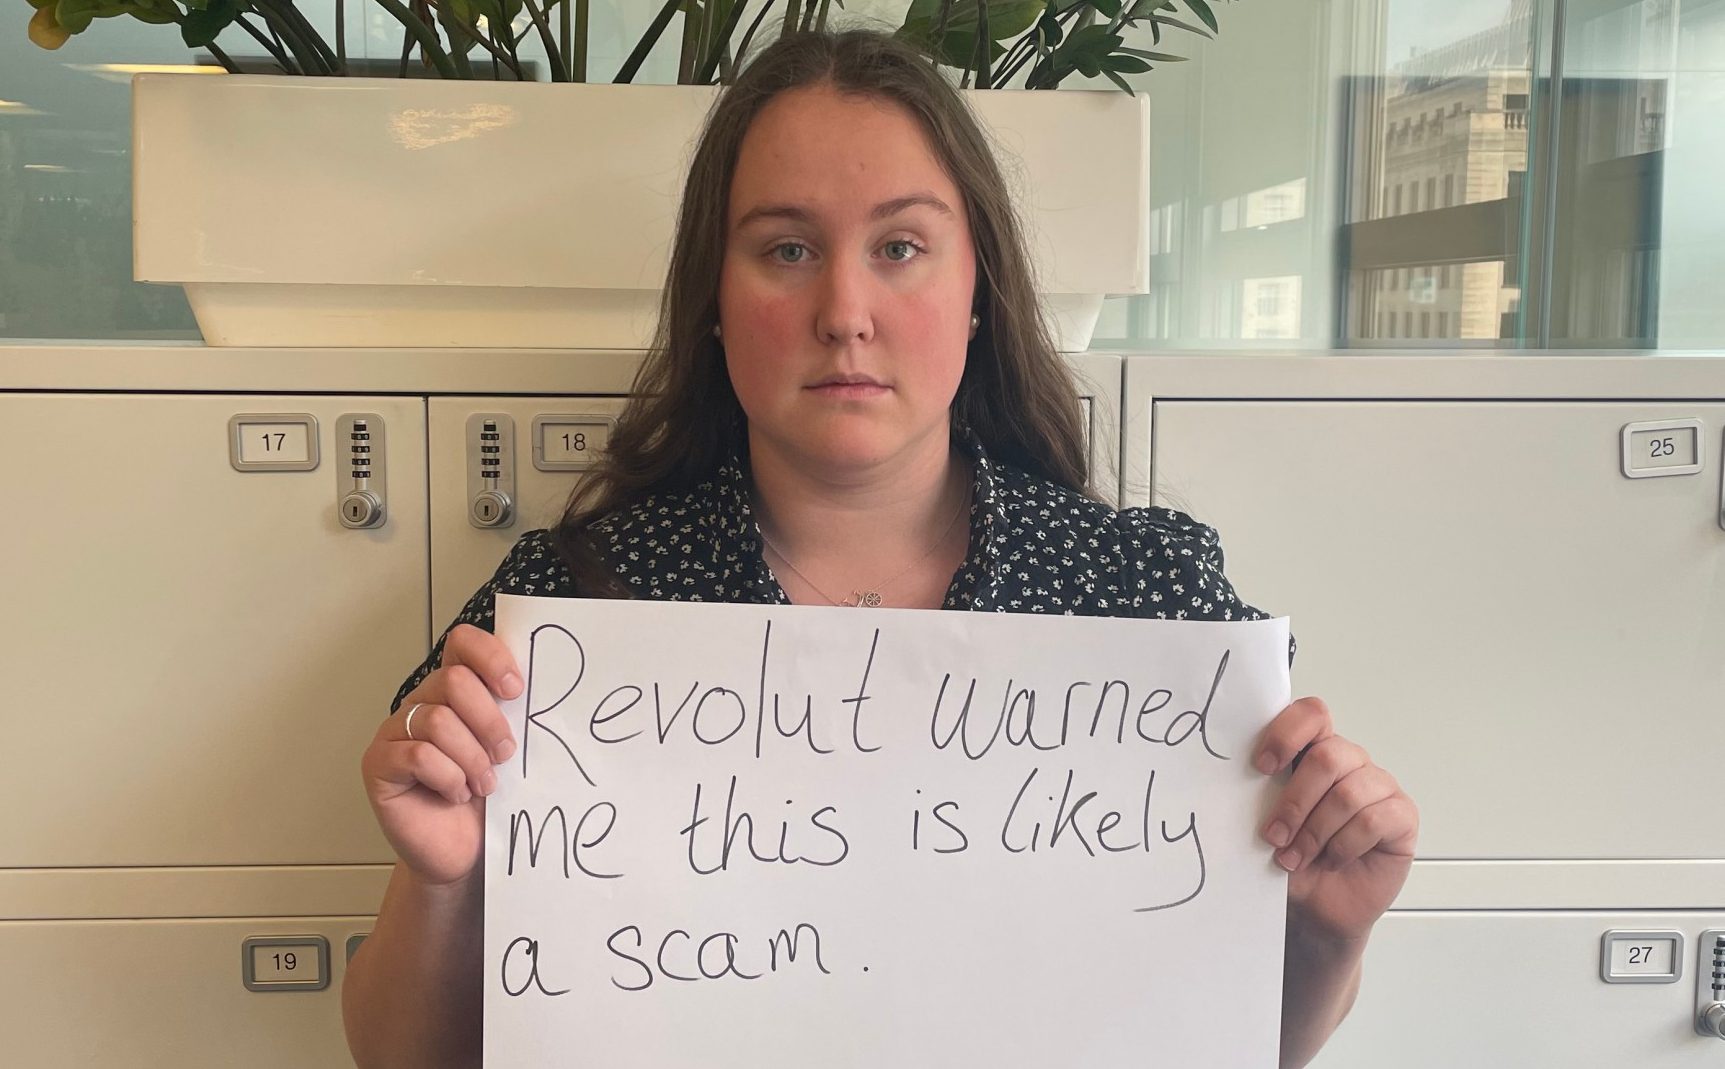 revolut asks suspected scam victims to send ‘hostage selfies’